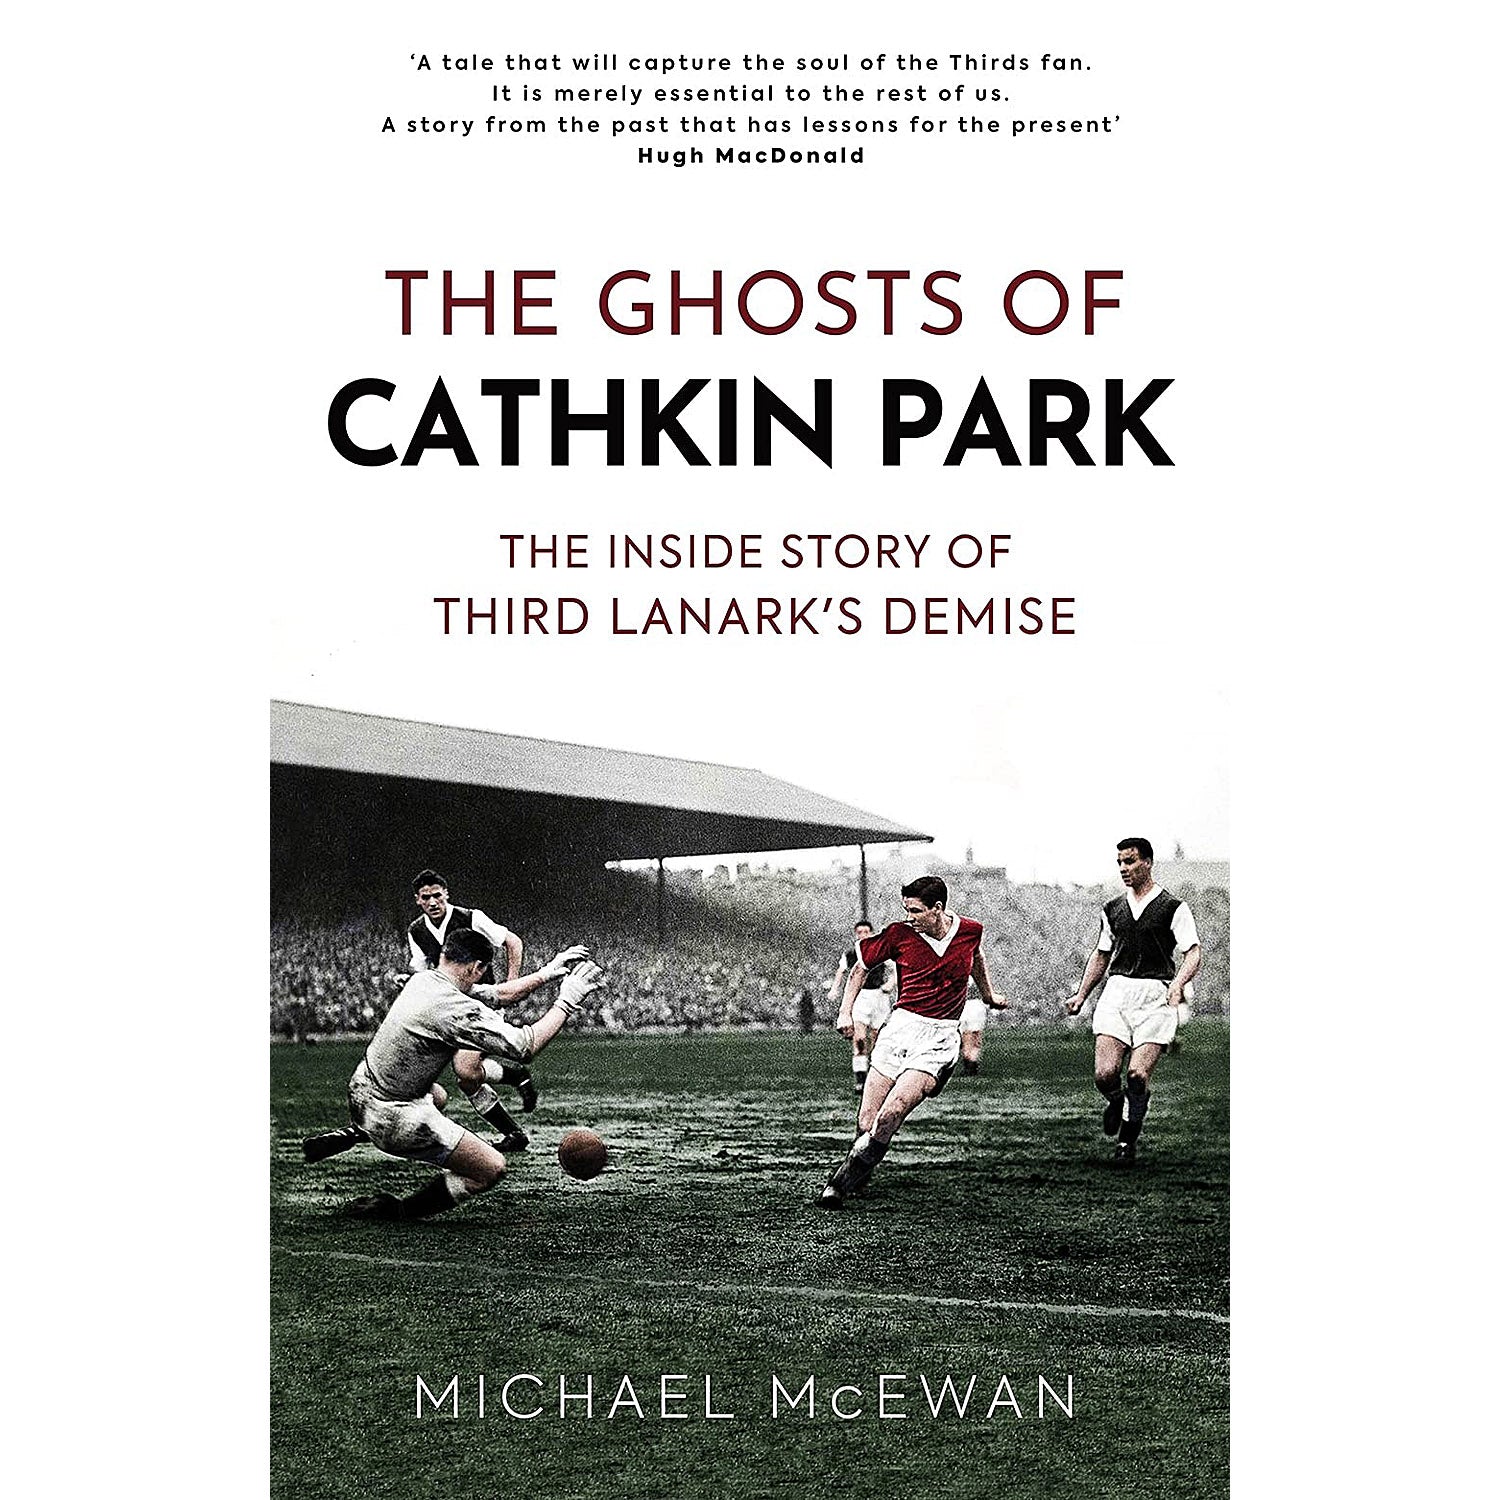 The Ghosts of Cathkin Park – The Inside Story of Third Lanark's Demise